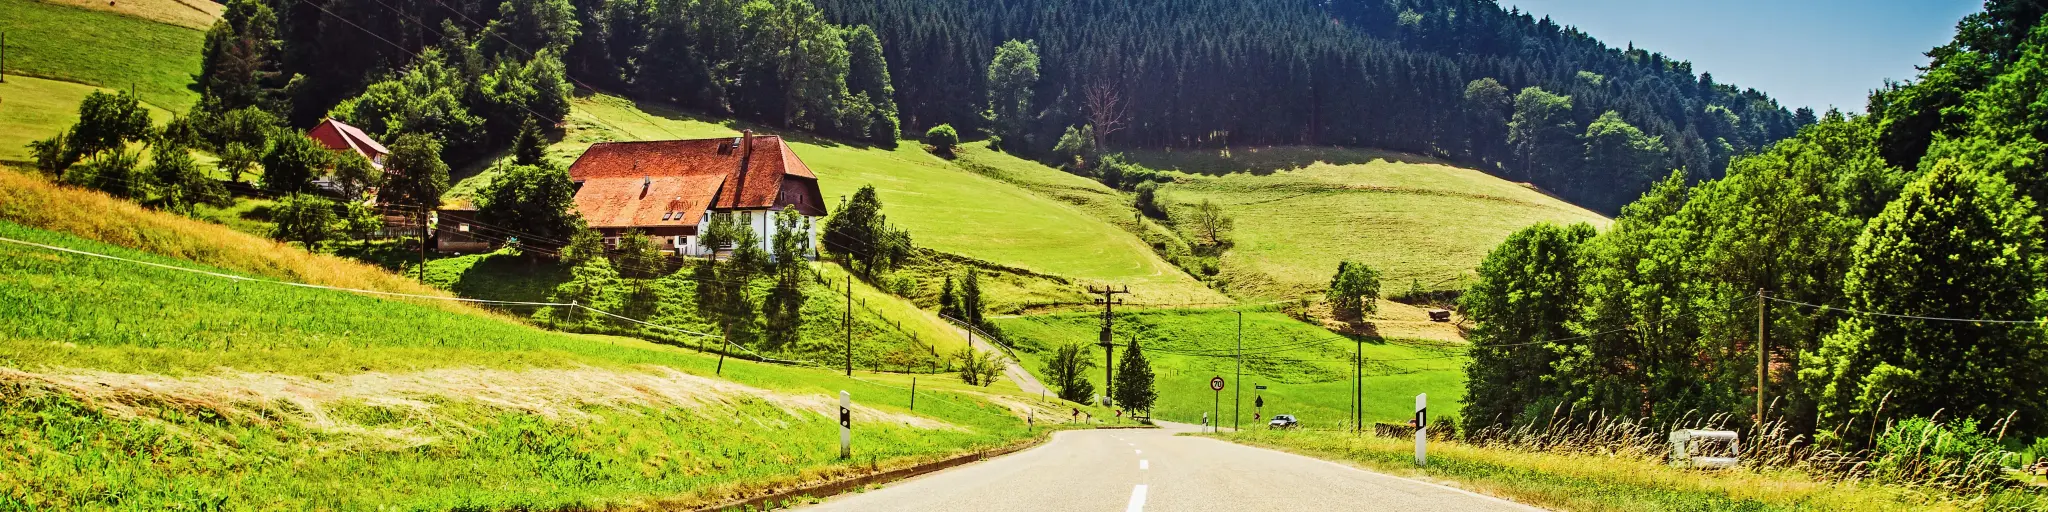 Cars on a German road with mountains and lush green hills in the background